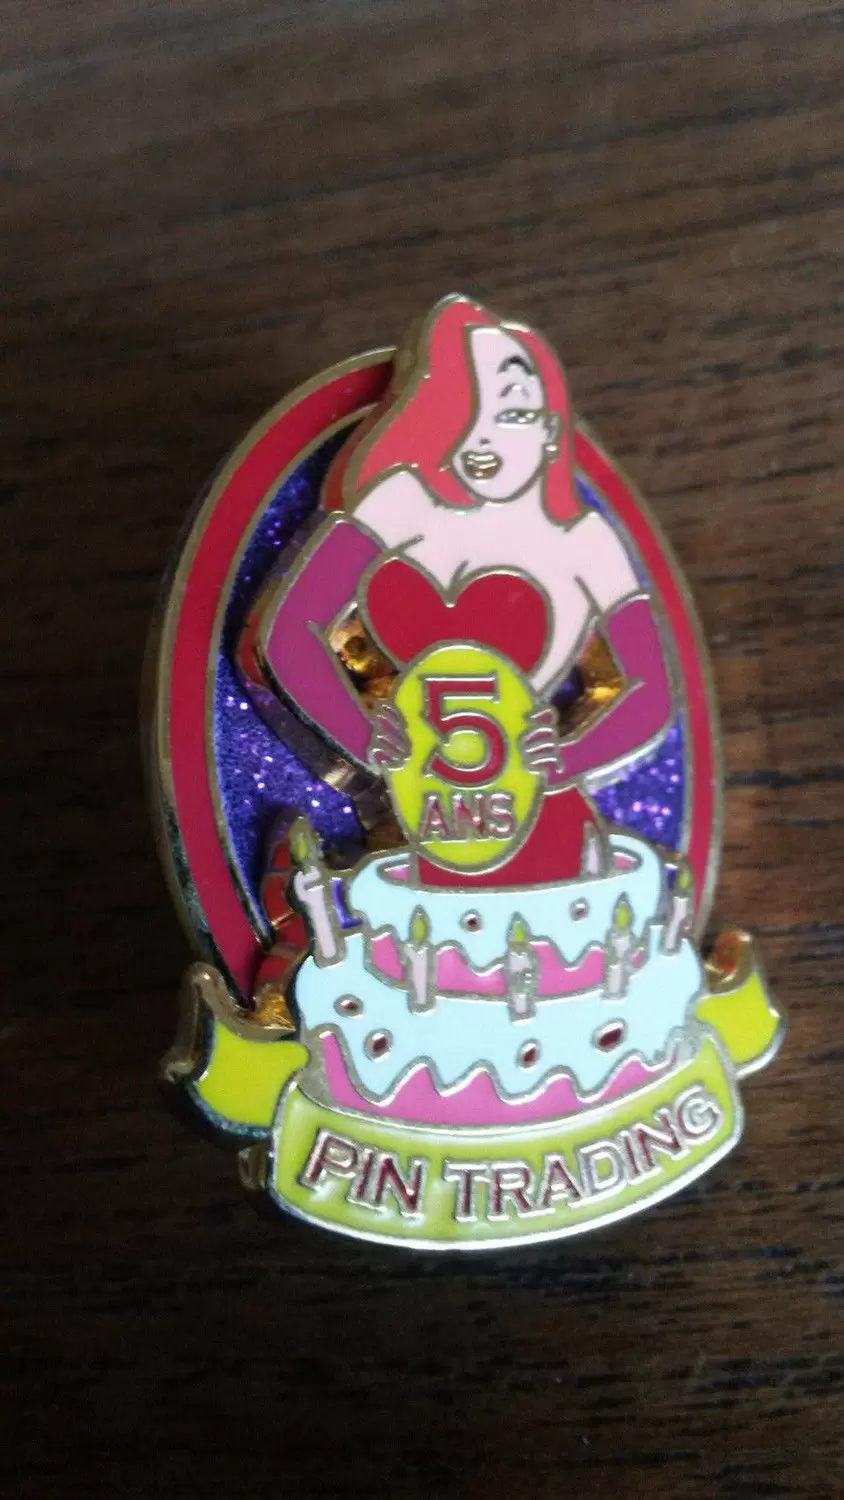 Pins Limited Edition - Jessica Pin Trading 5 Years